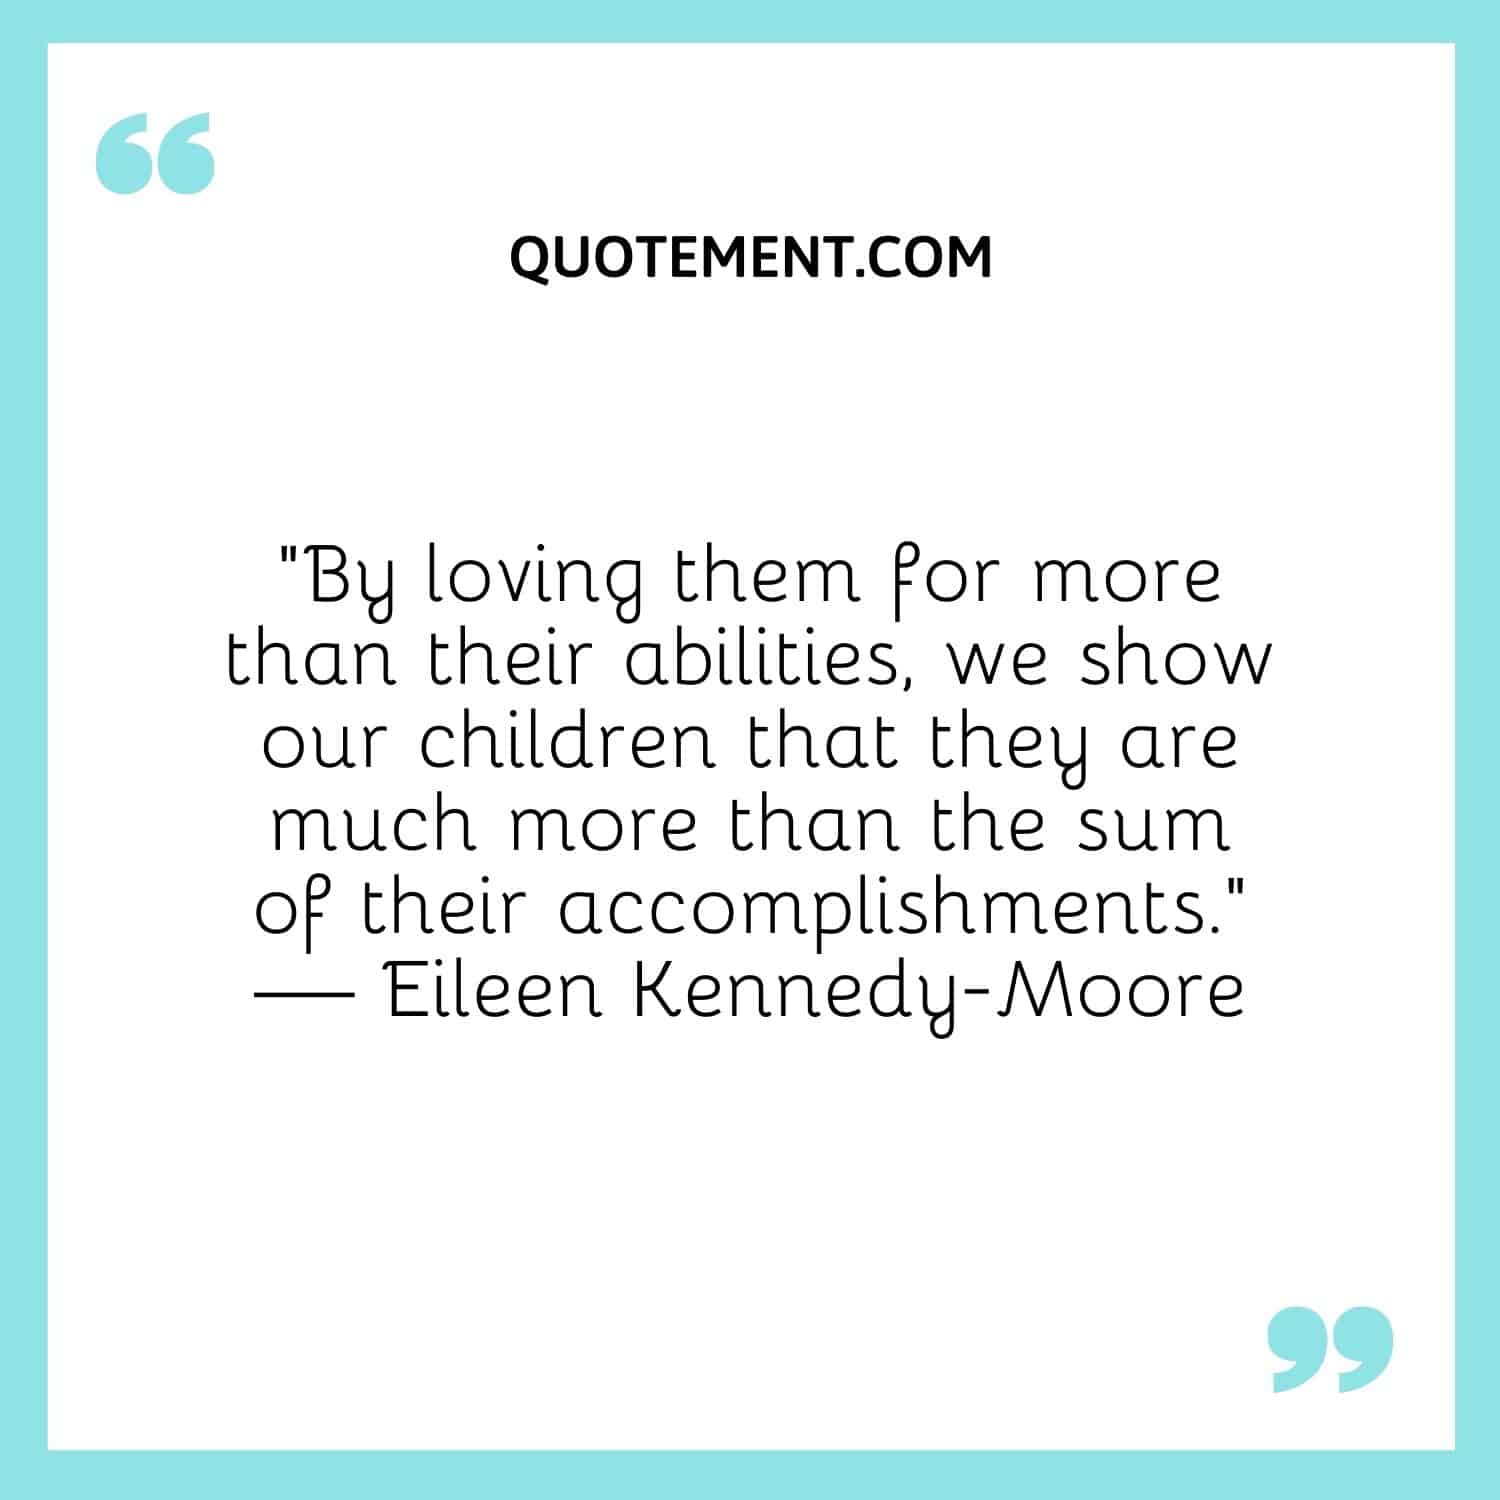 “By loving them for more than their abilities, we show our children that they are much more than the sum of their accomplishments.” — Eileen Kennedy-Moore